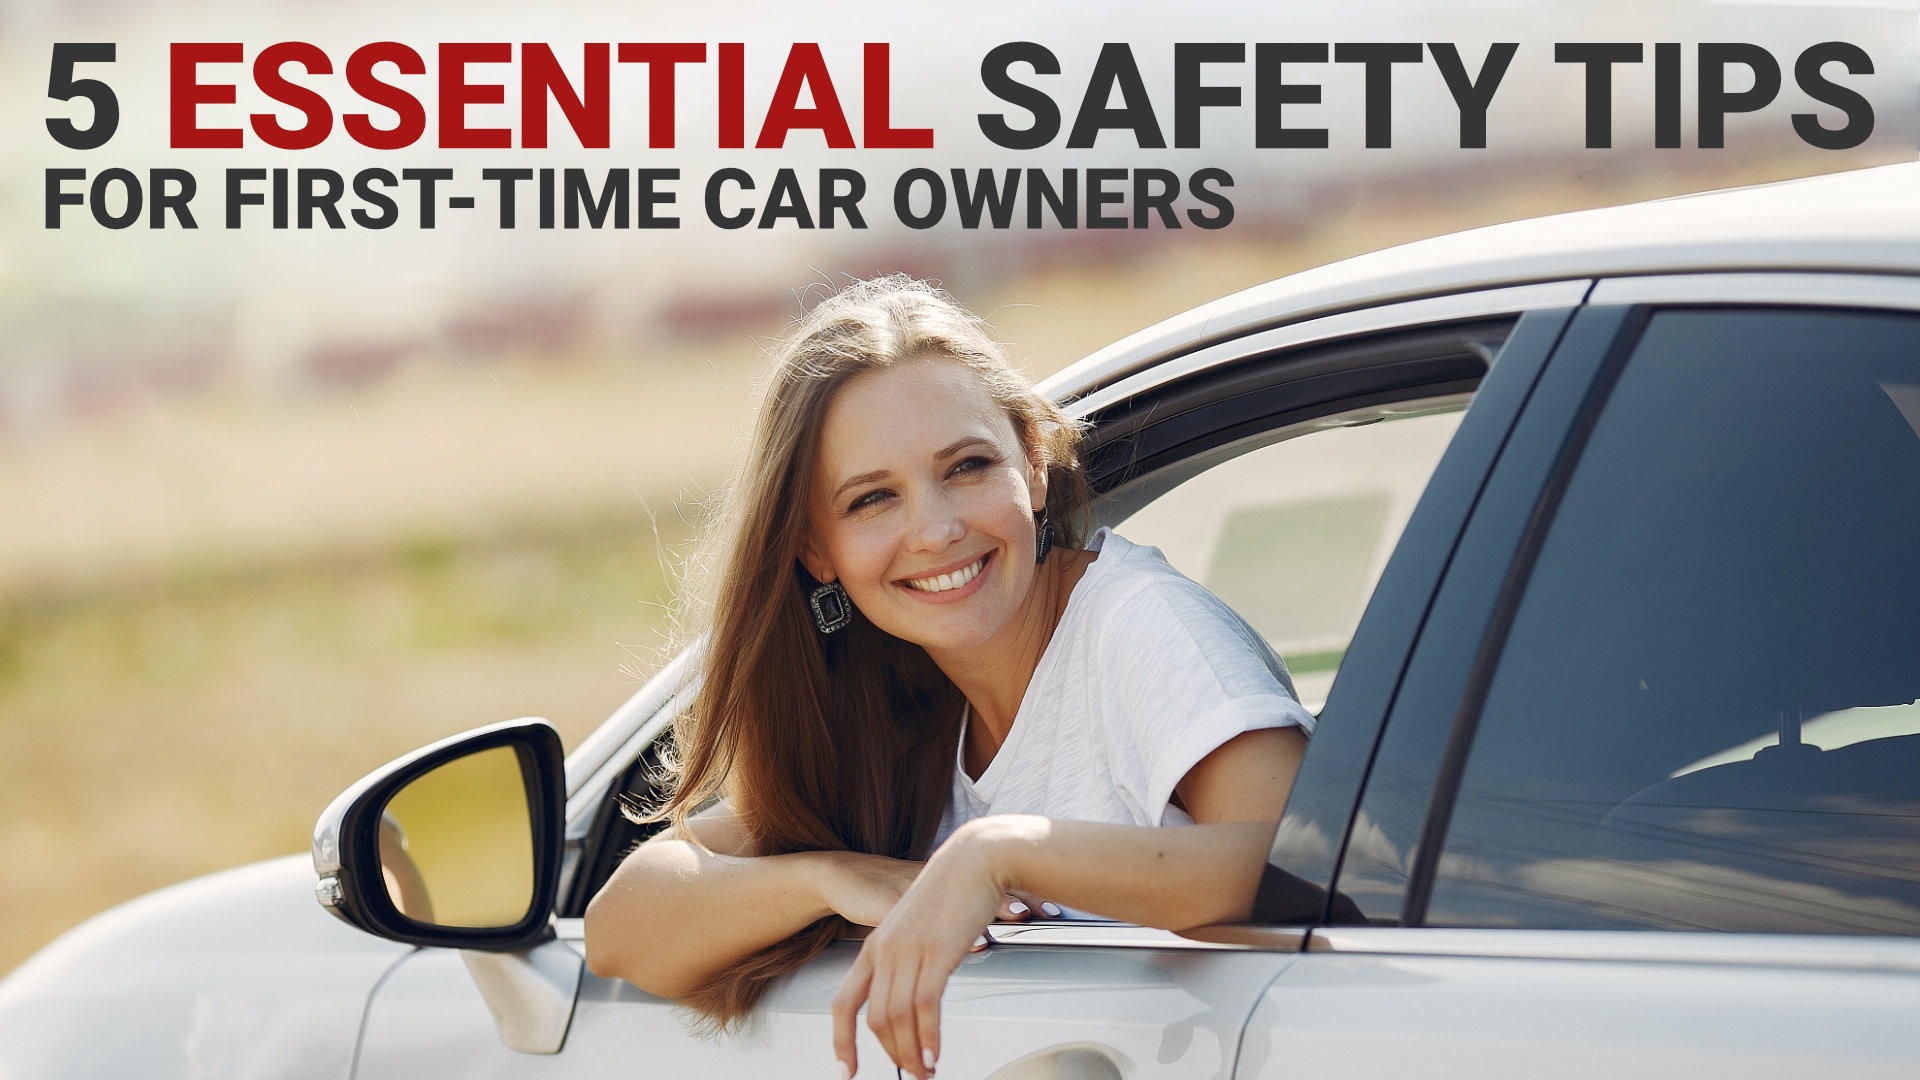 5 Essential Safety Tips for First-Time Car Owners